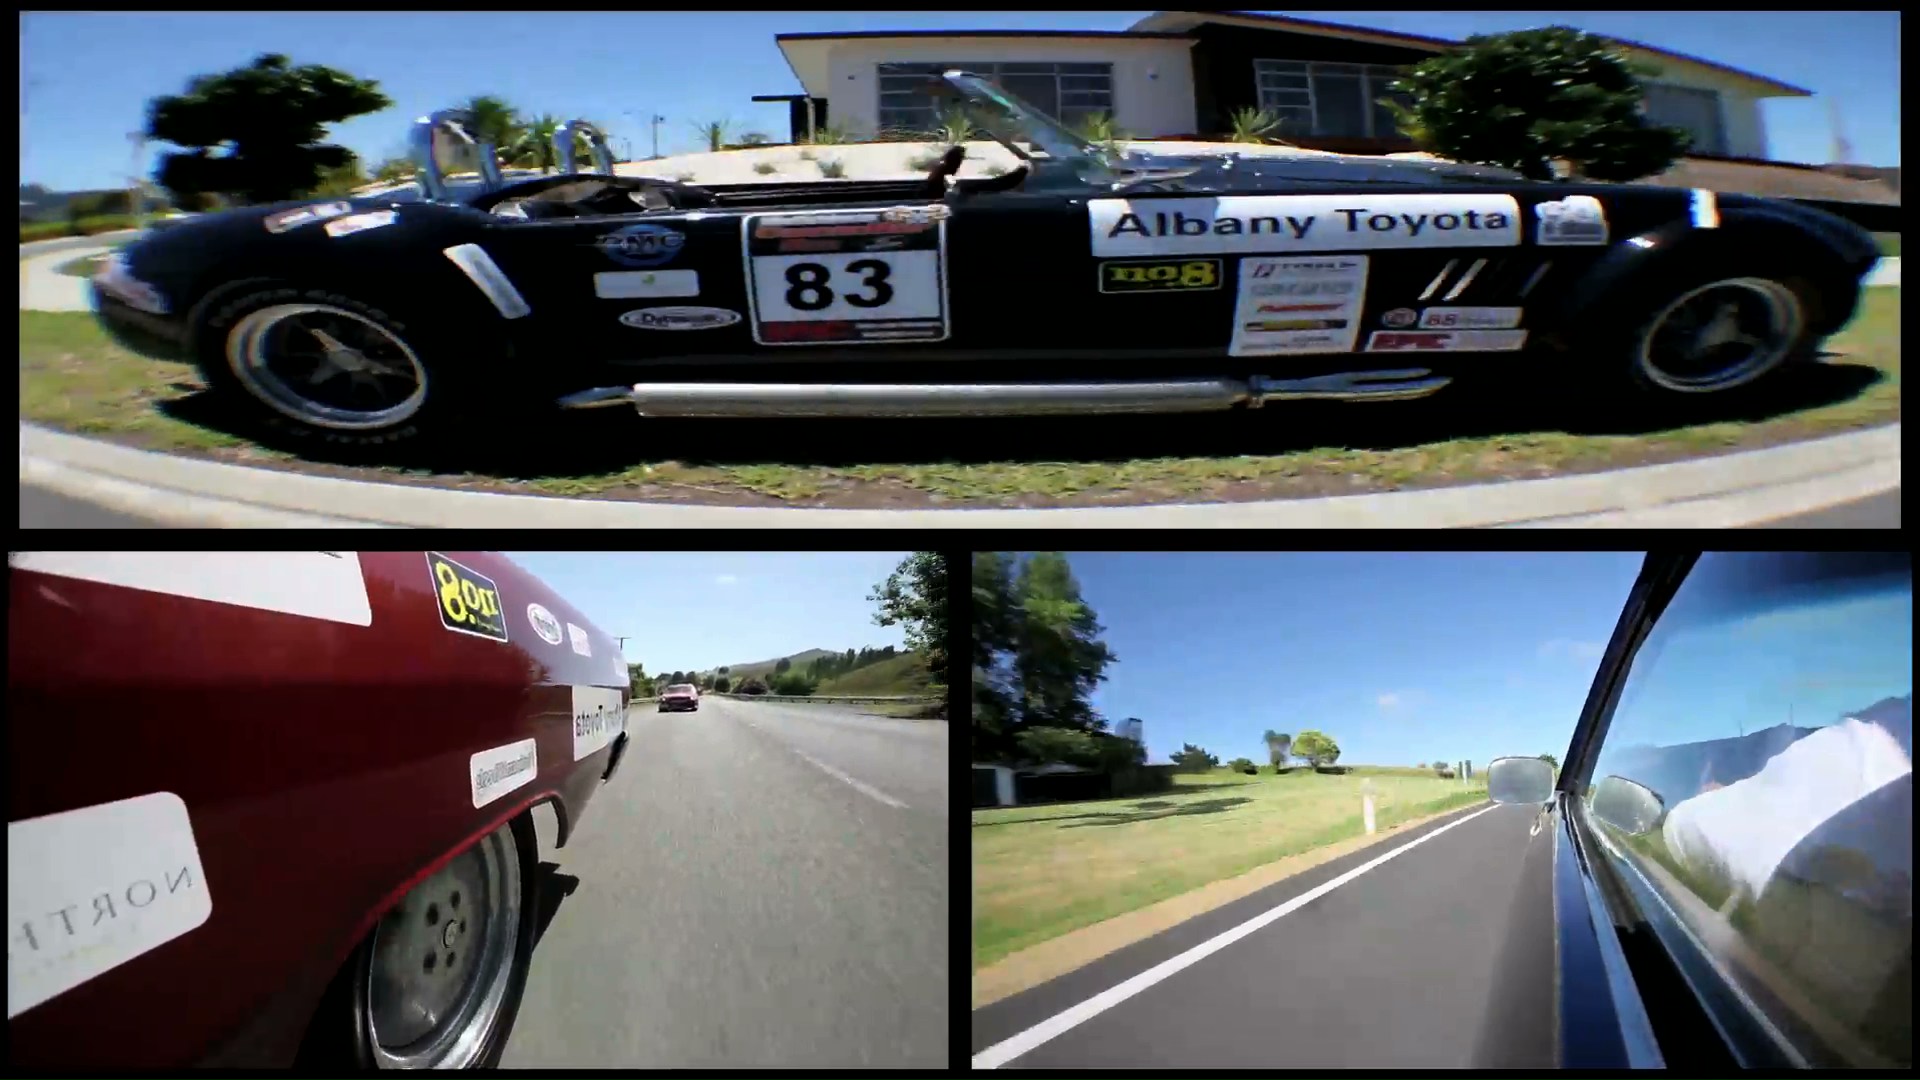 Sill Frame from CannonBall Run NZ Edition Event 2011